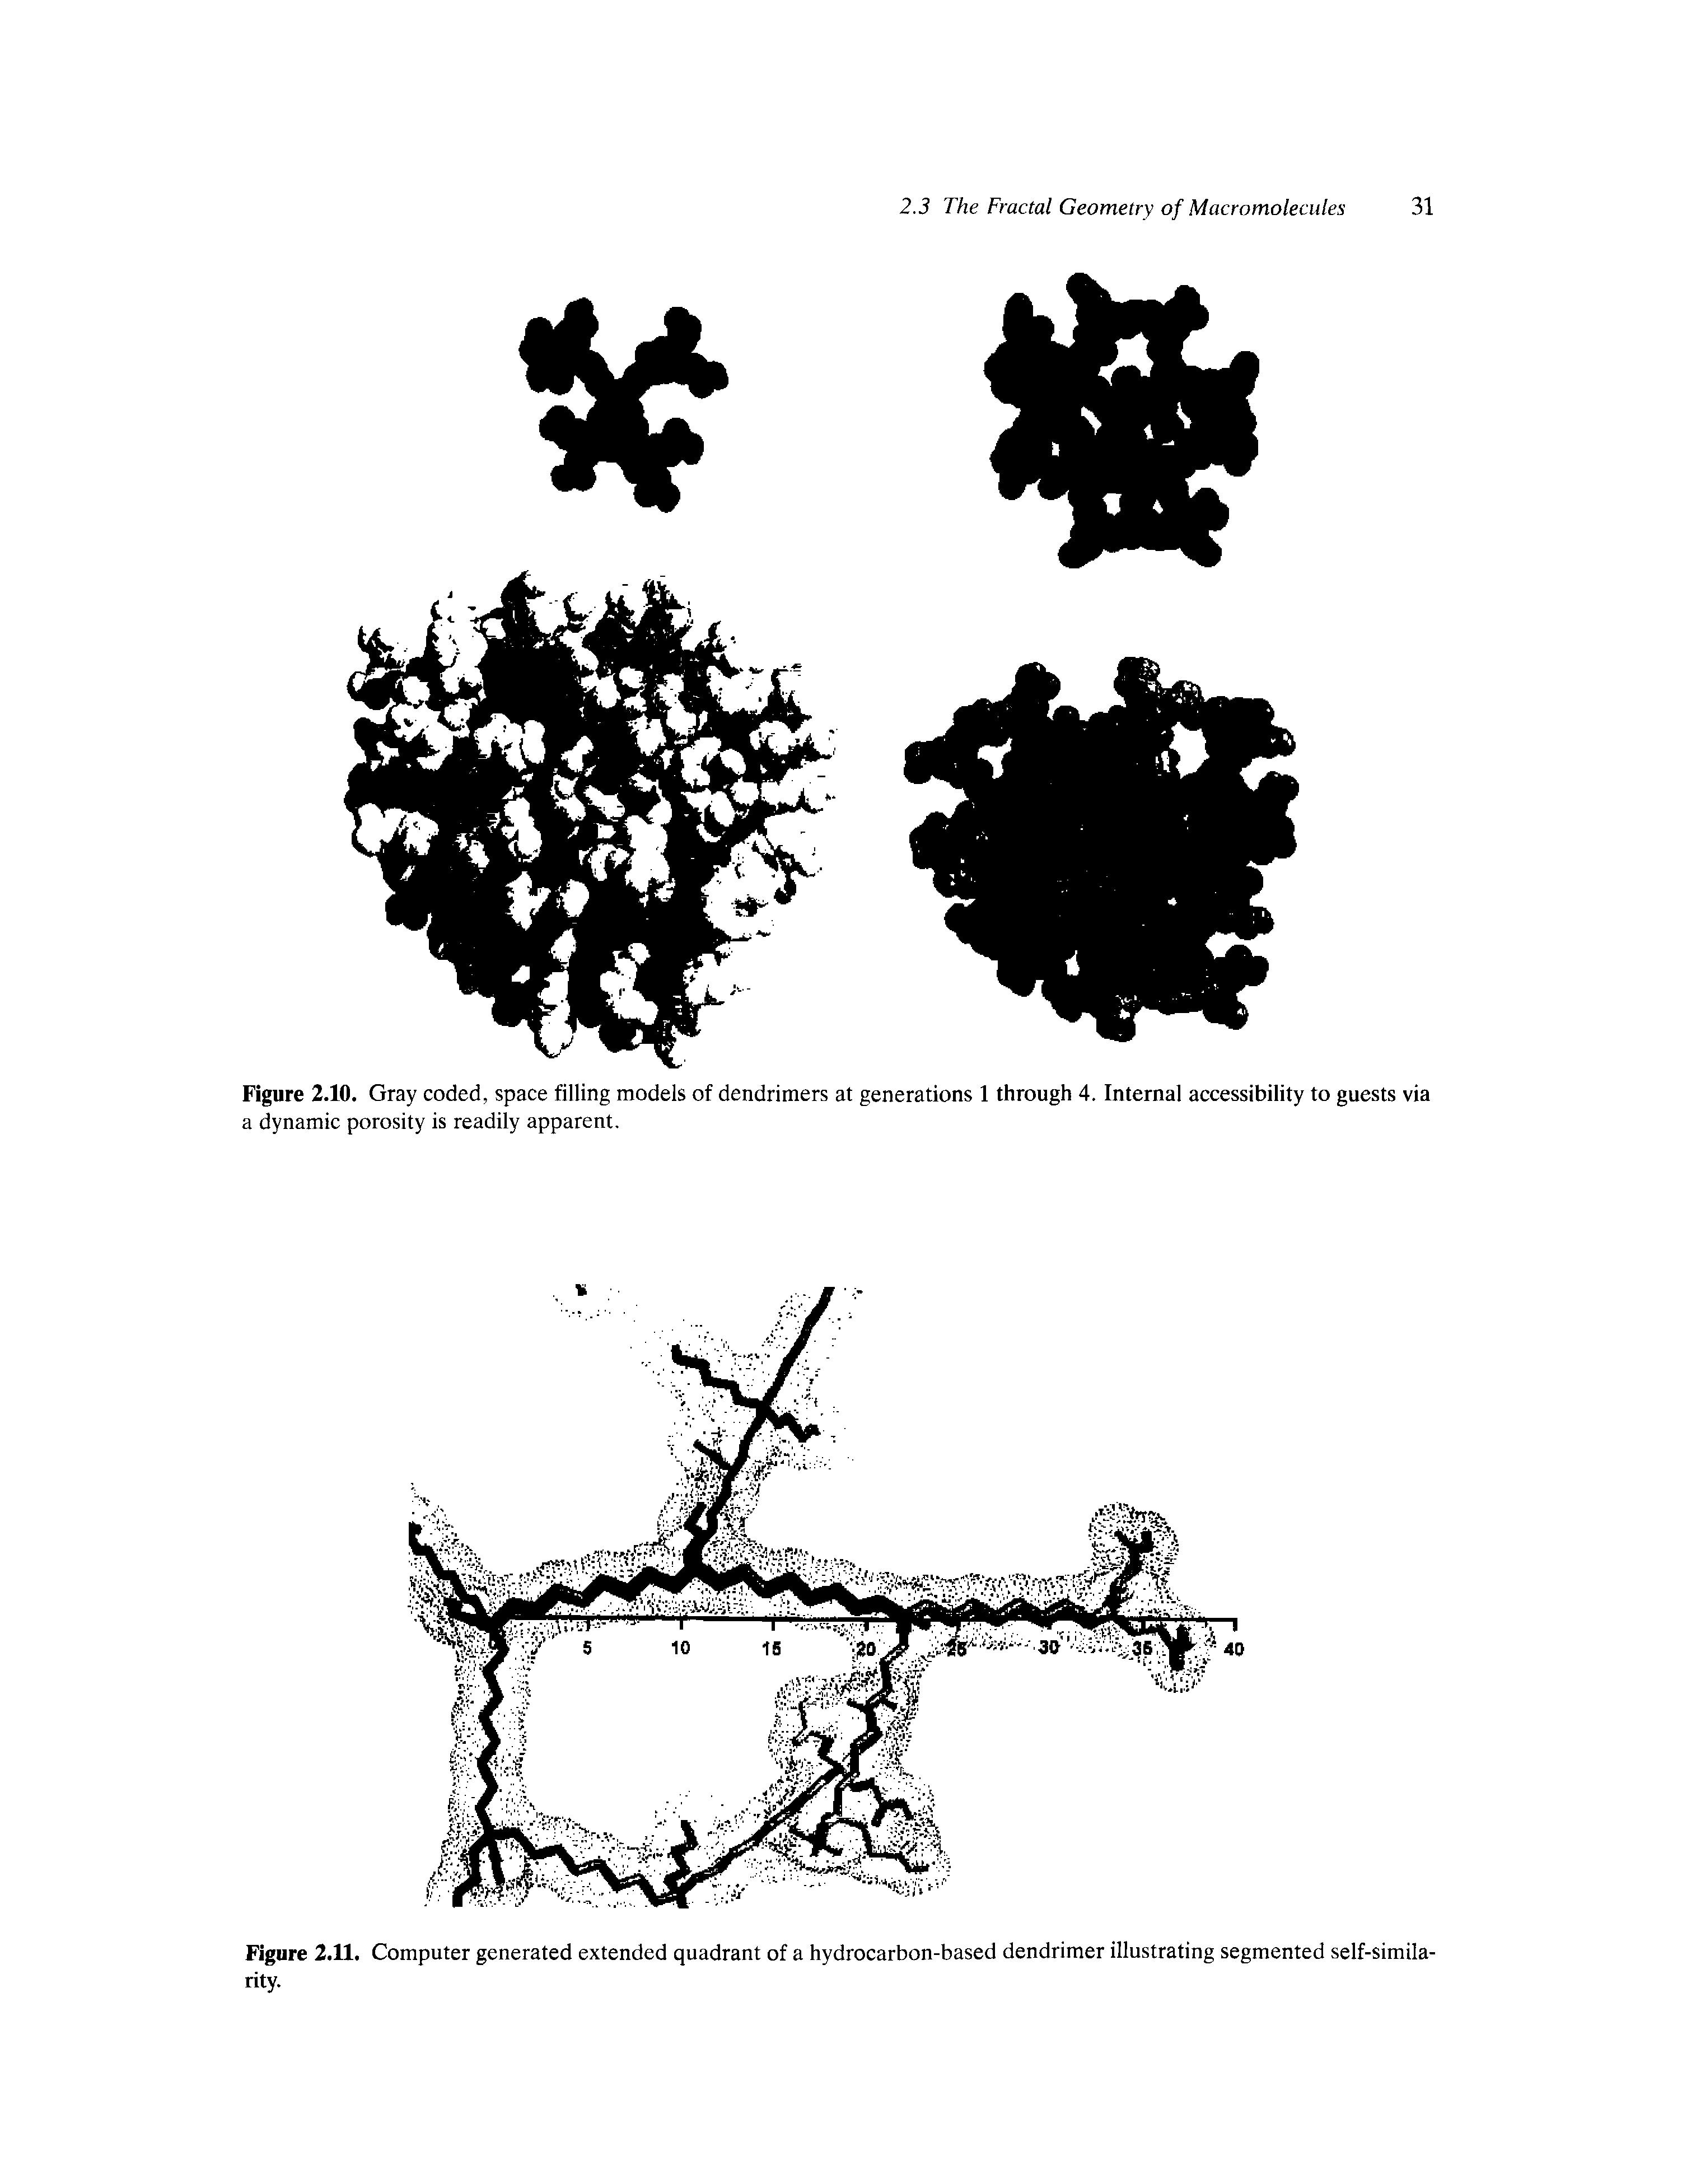 Figure 2.11. Computer generated extended quadrant of a hydrocarbon-based dendrimer illustrating segmented self-similarity.